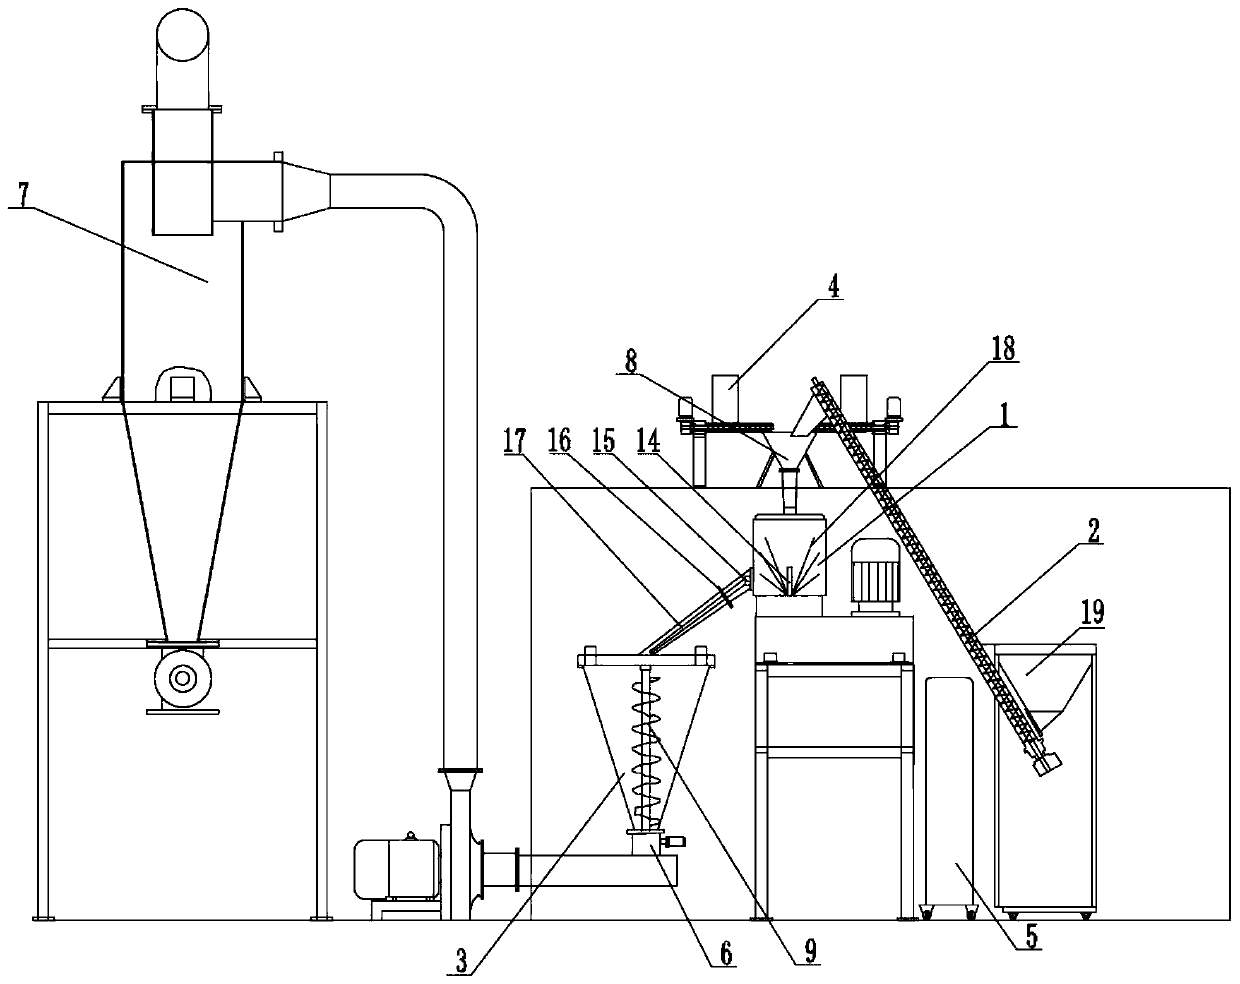 Polymer mixing system